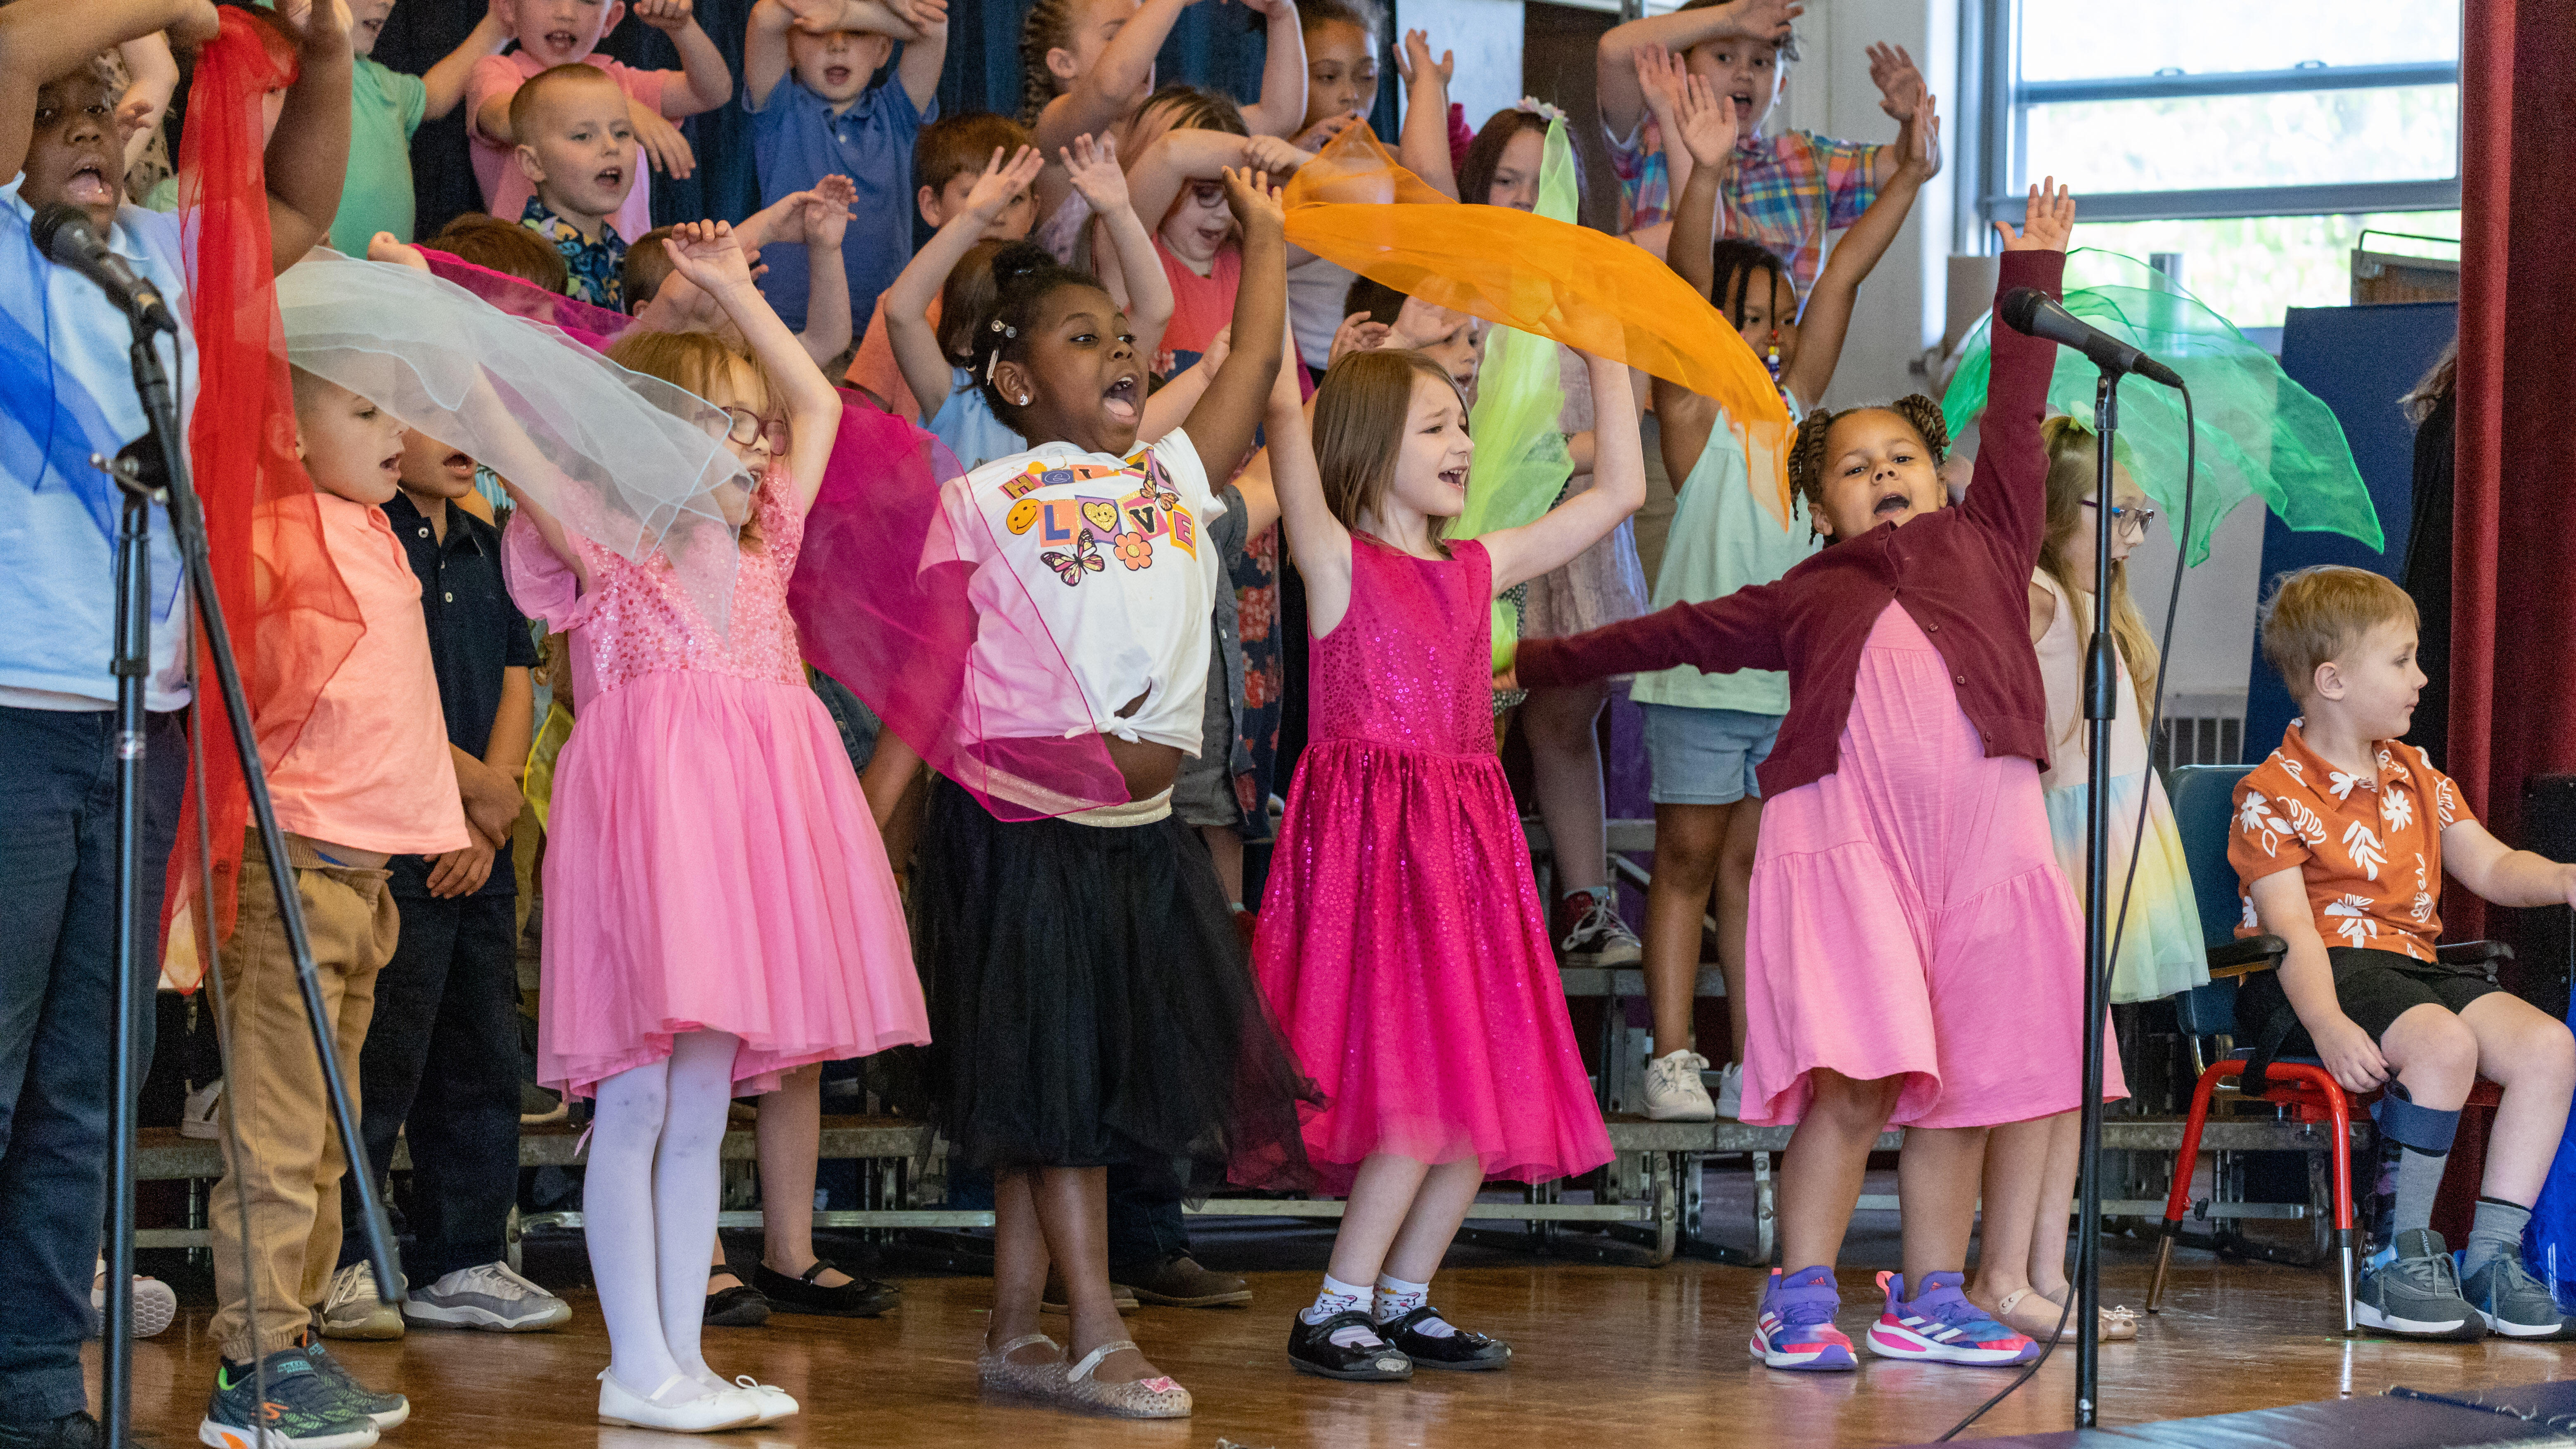 Park students bring some sunshine with "Music in the Valley" show